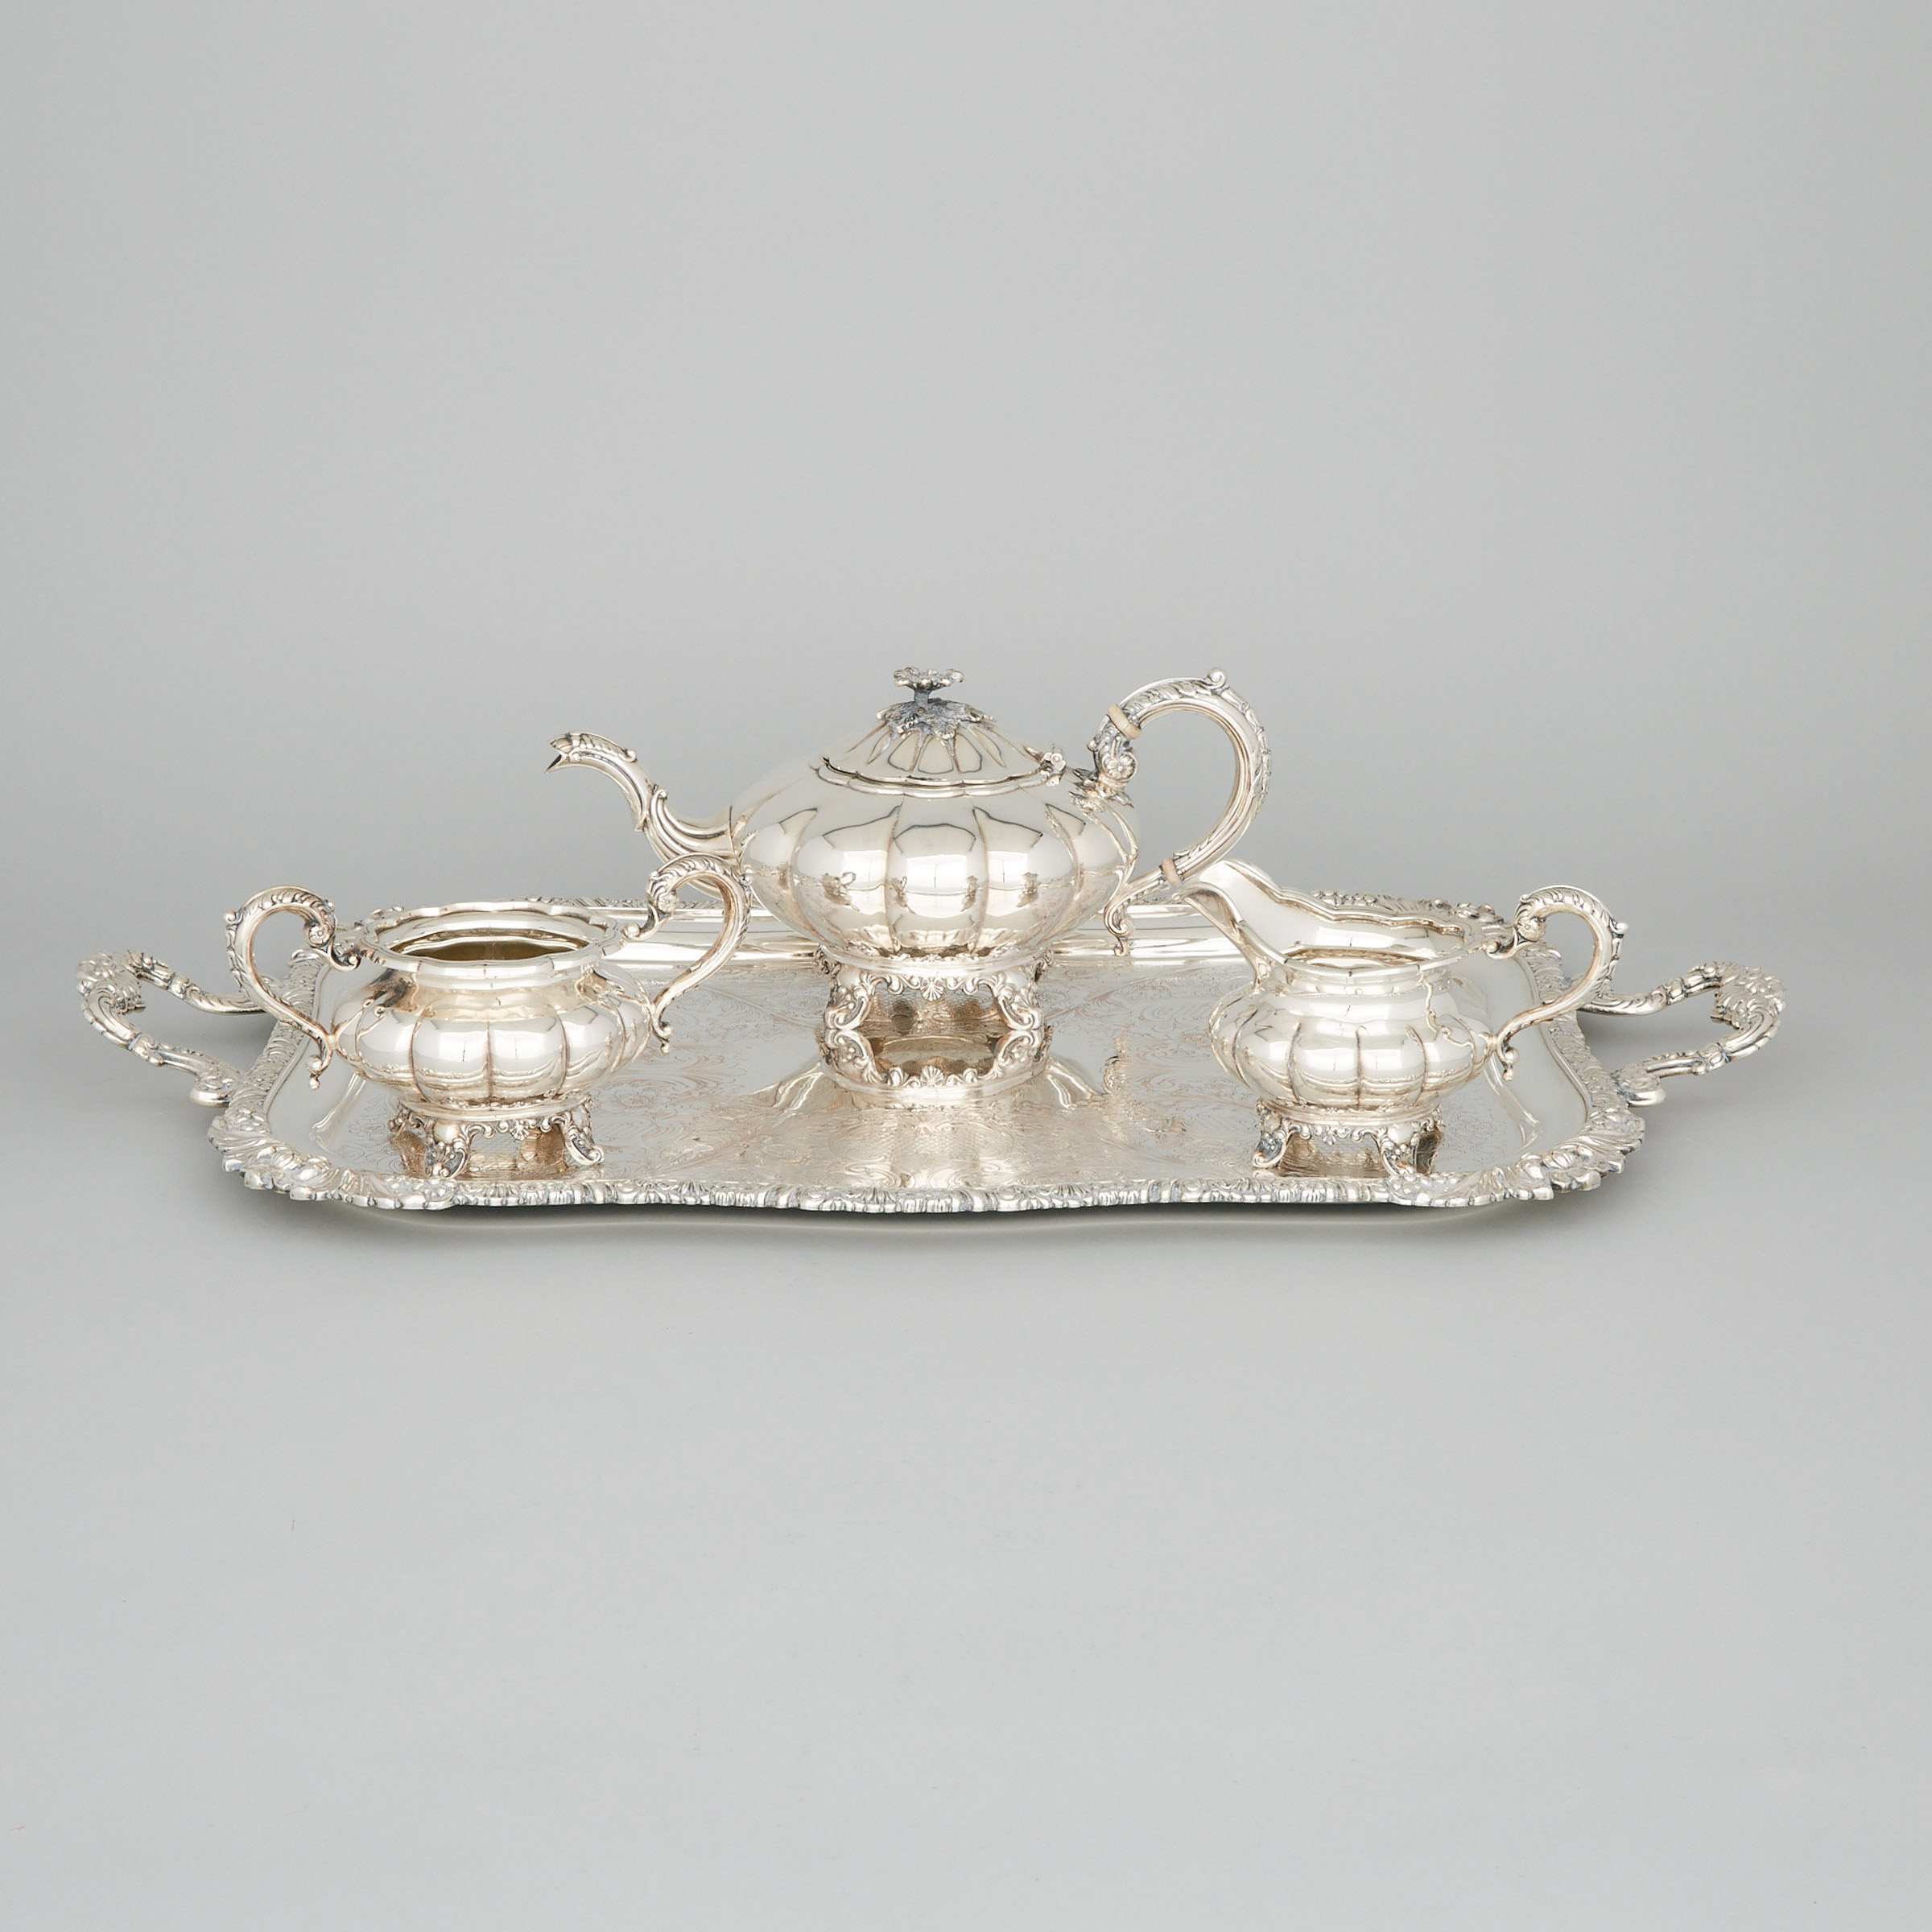 Canadian Silver Tea Service, Henry Birks & Sons, Montreal, Que., 1947